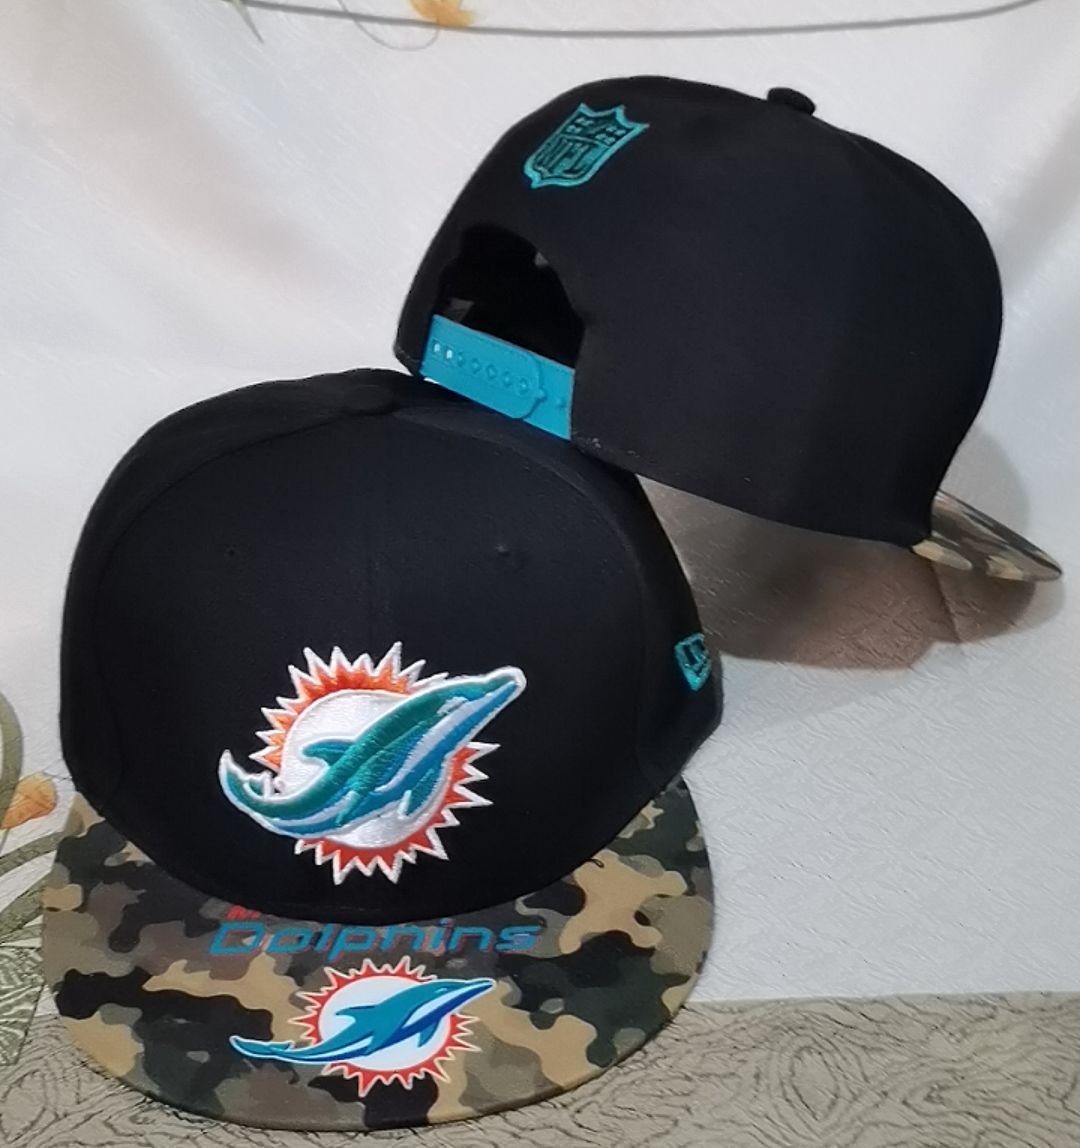 2022 NFL Miami Dolphins Hat YS1115->nfl hats->Sports Caps